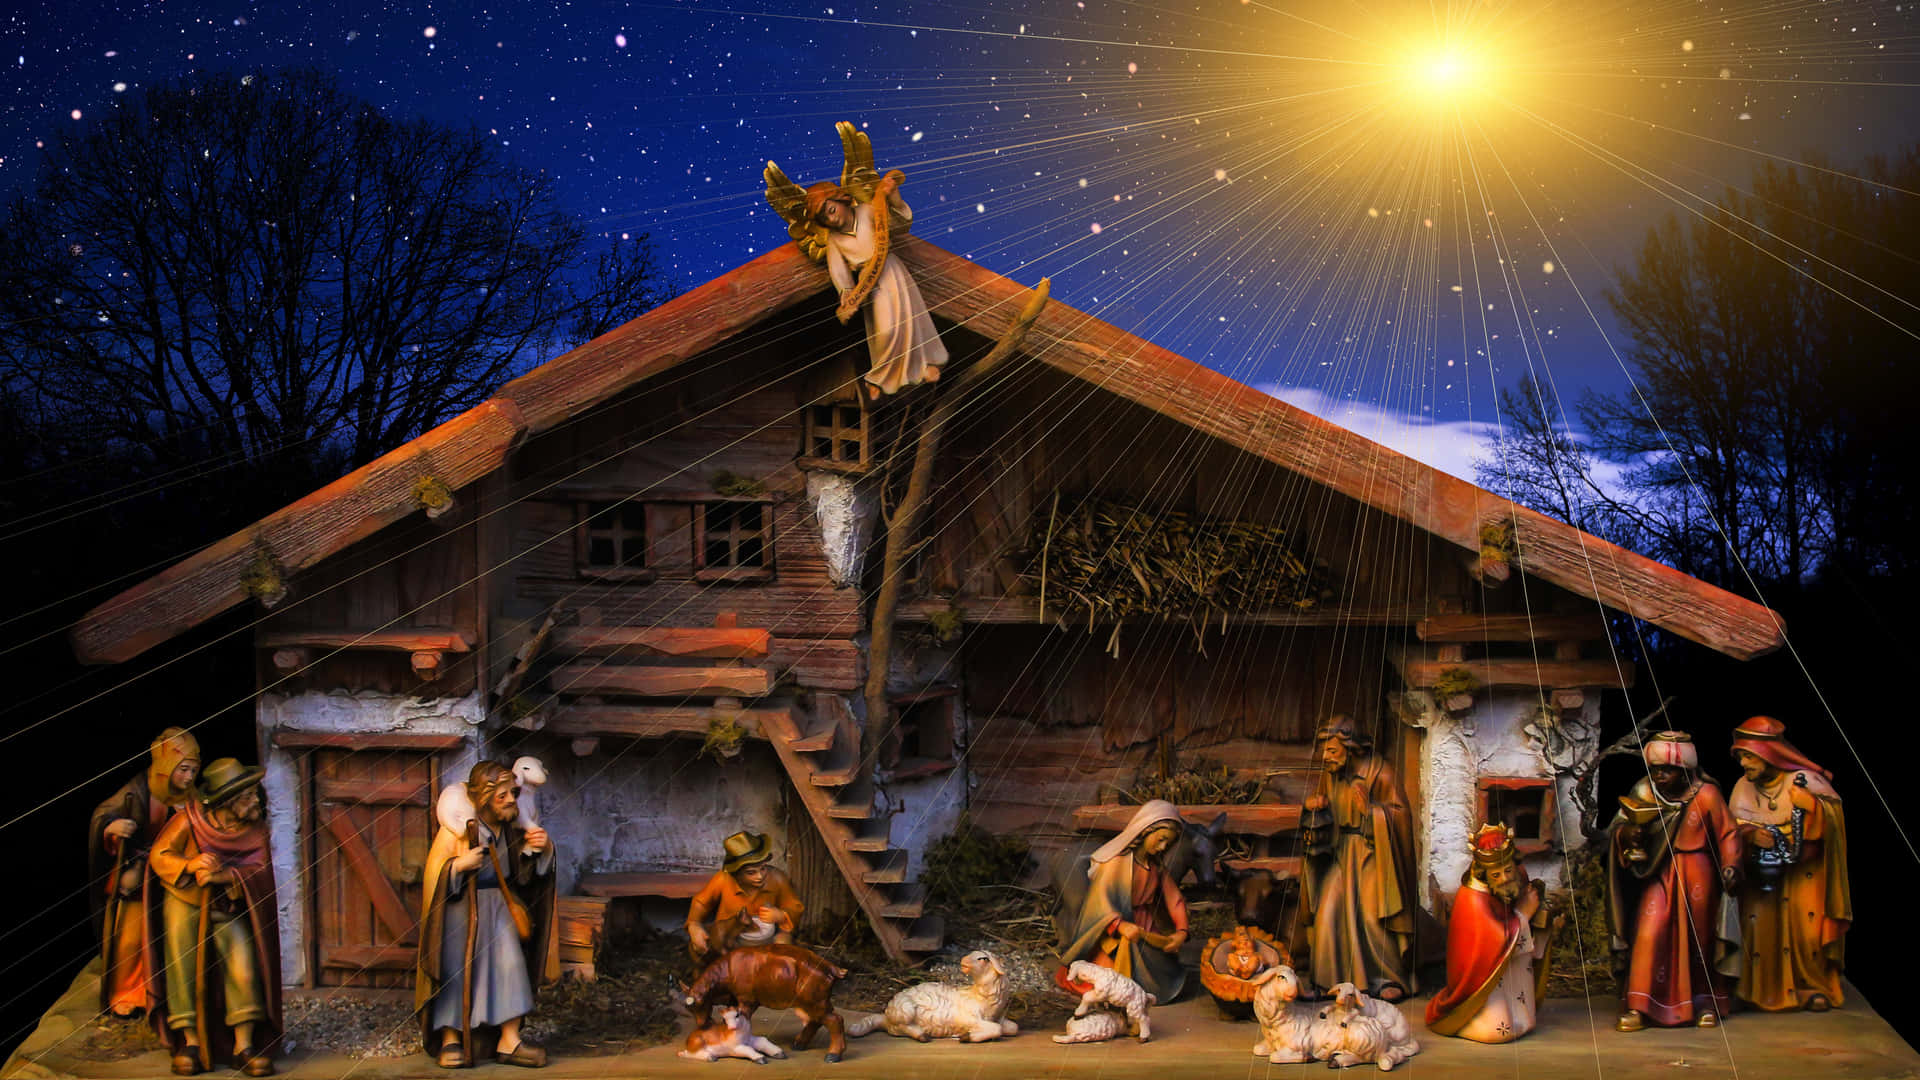 Celebrate Jesus' birth with a joyous Christmas Wallpaper